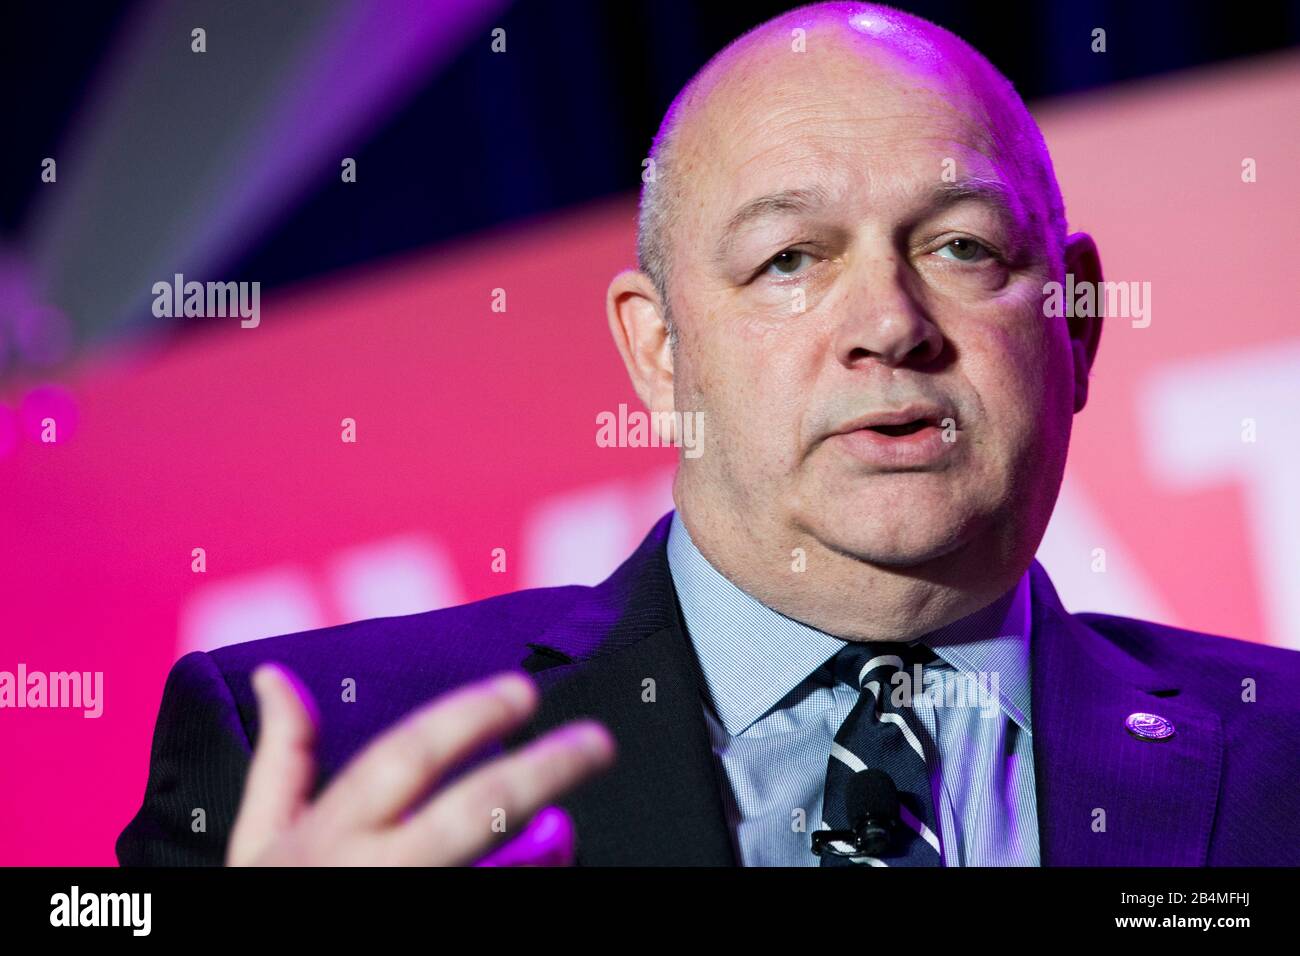 Steve Dickson, Administrator, Federal Aviation Administration (FAA), speaks at the U.S. Chamber of Commerce Aviation Summit in Washington, D.C. on Mar Stock Photo